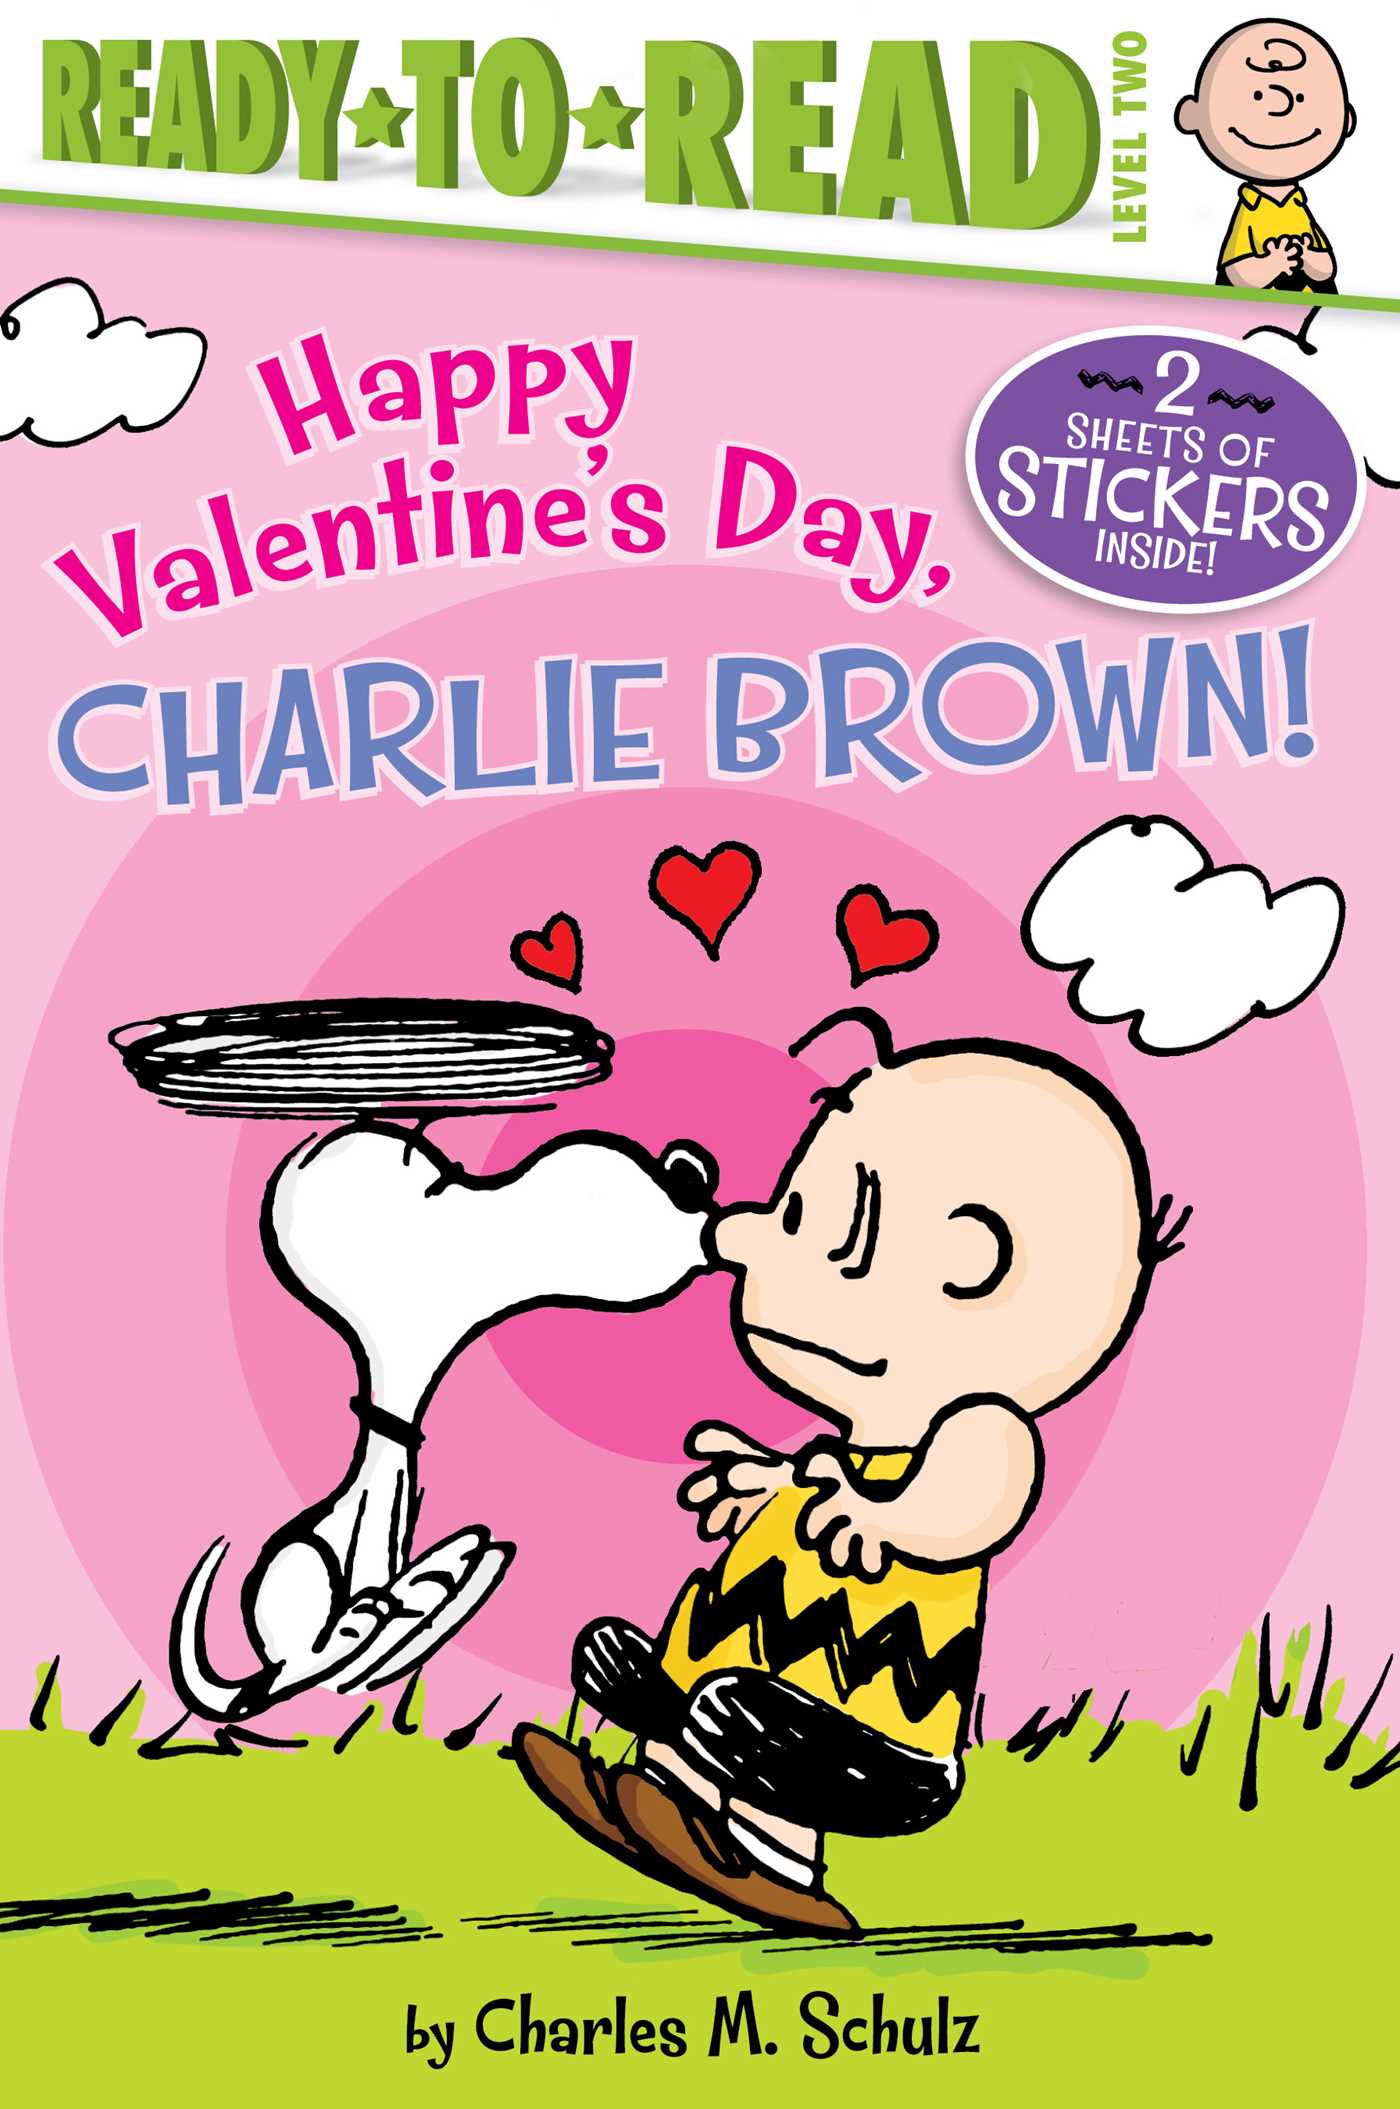 Happy Valentine's Day, Charlie Brown book cover